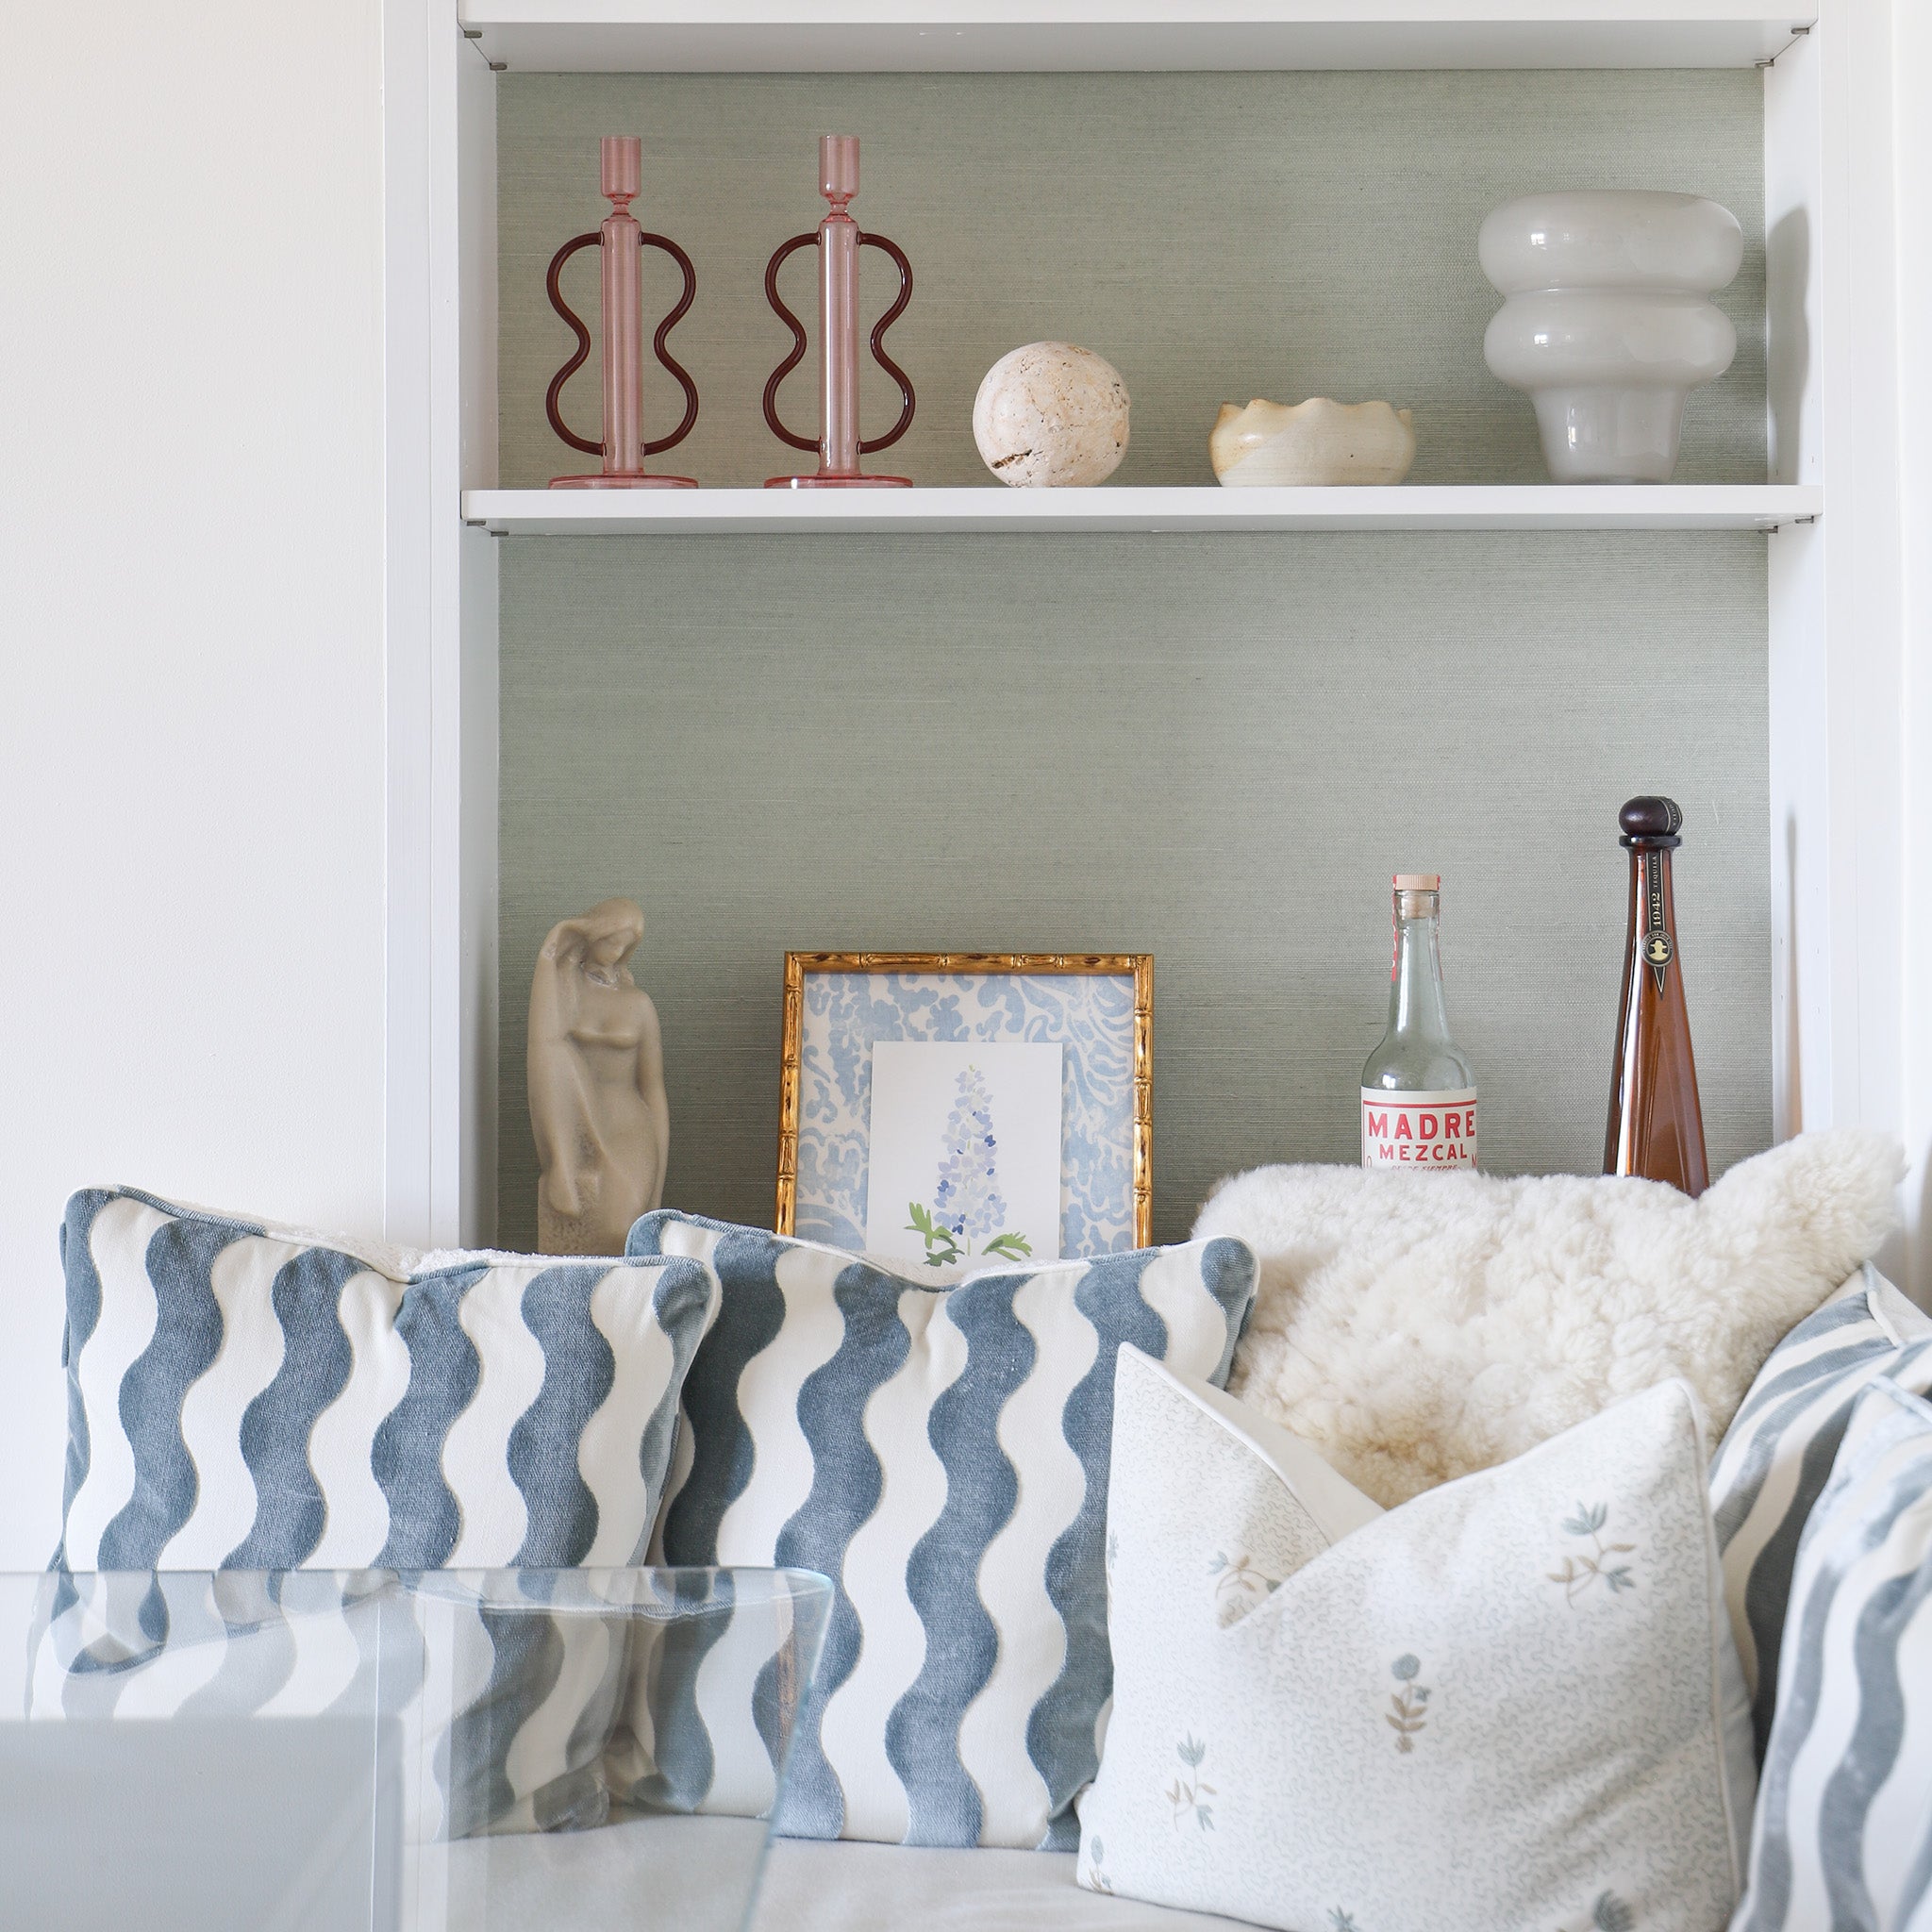 blue green grasscloth wallpaper on the wall with white wooden built in shelves on it with bottles and vases on it and a white couch in front with blue and white pillows on it